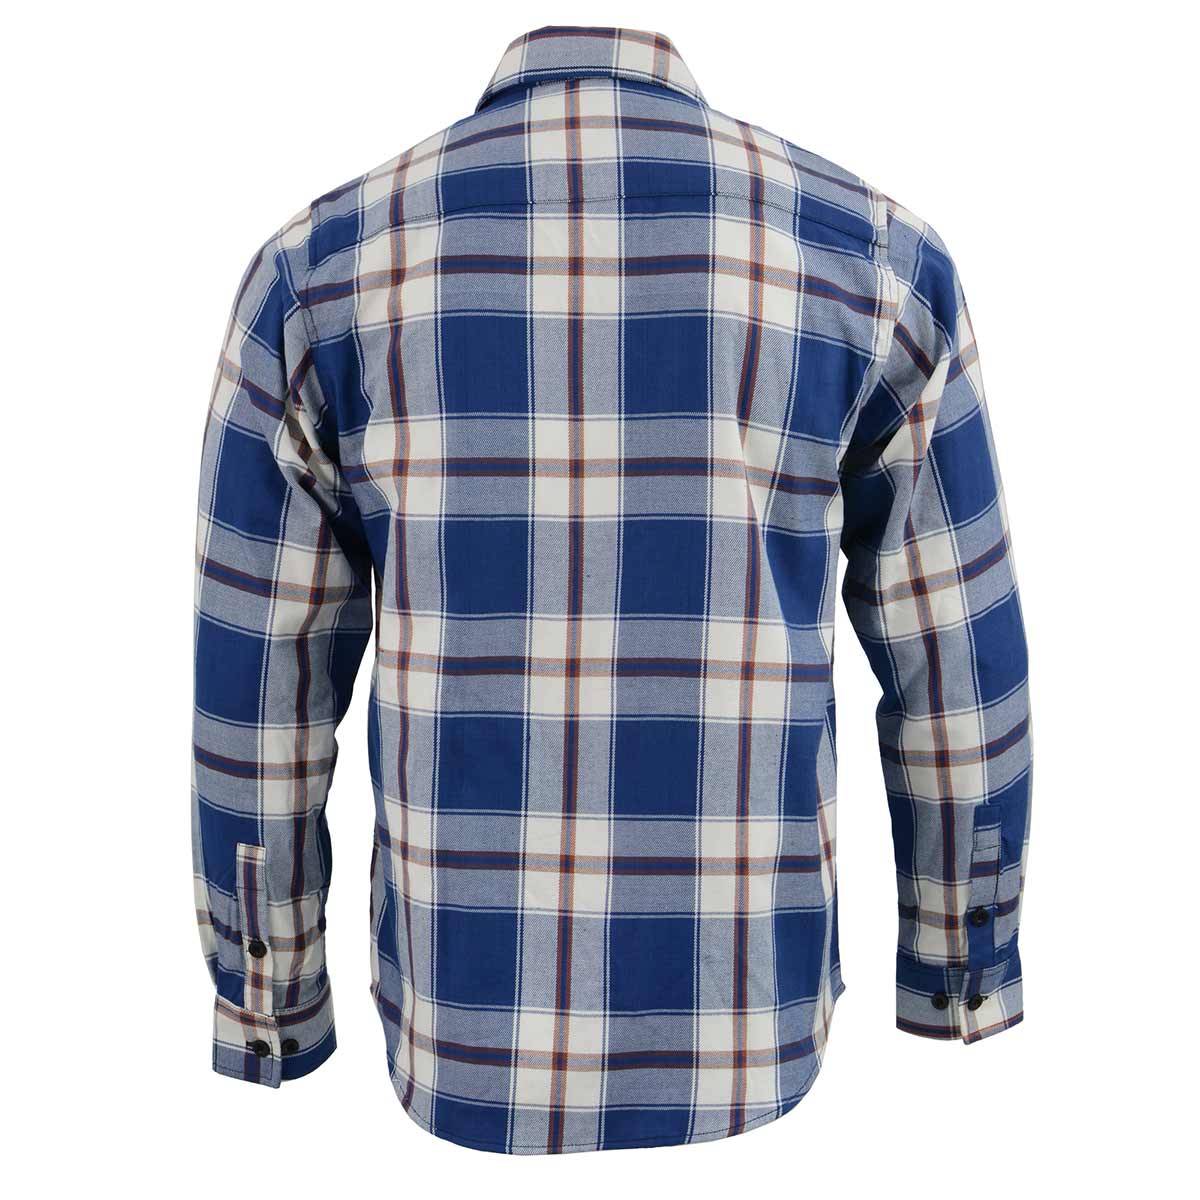 NexGen MNG11645 Men's Blue with White and Maroon Long Sleeve Cotton Flannel Shirt